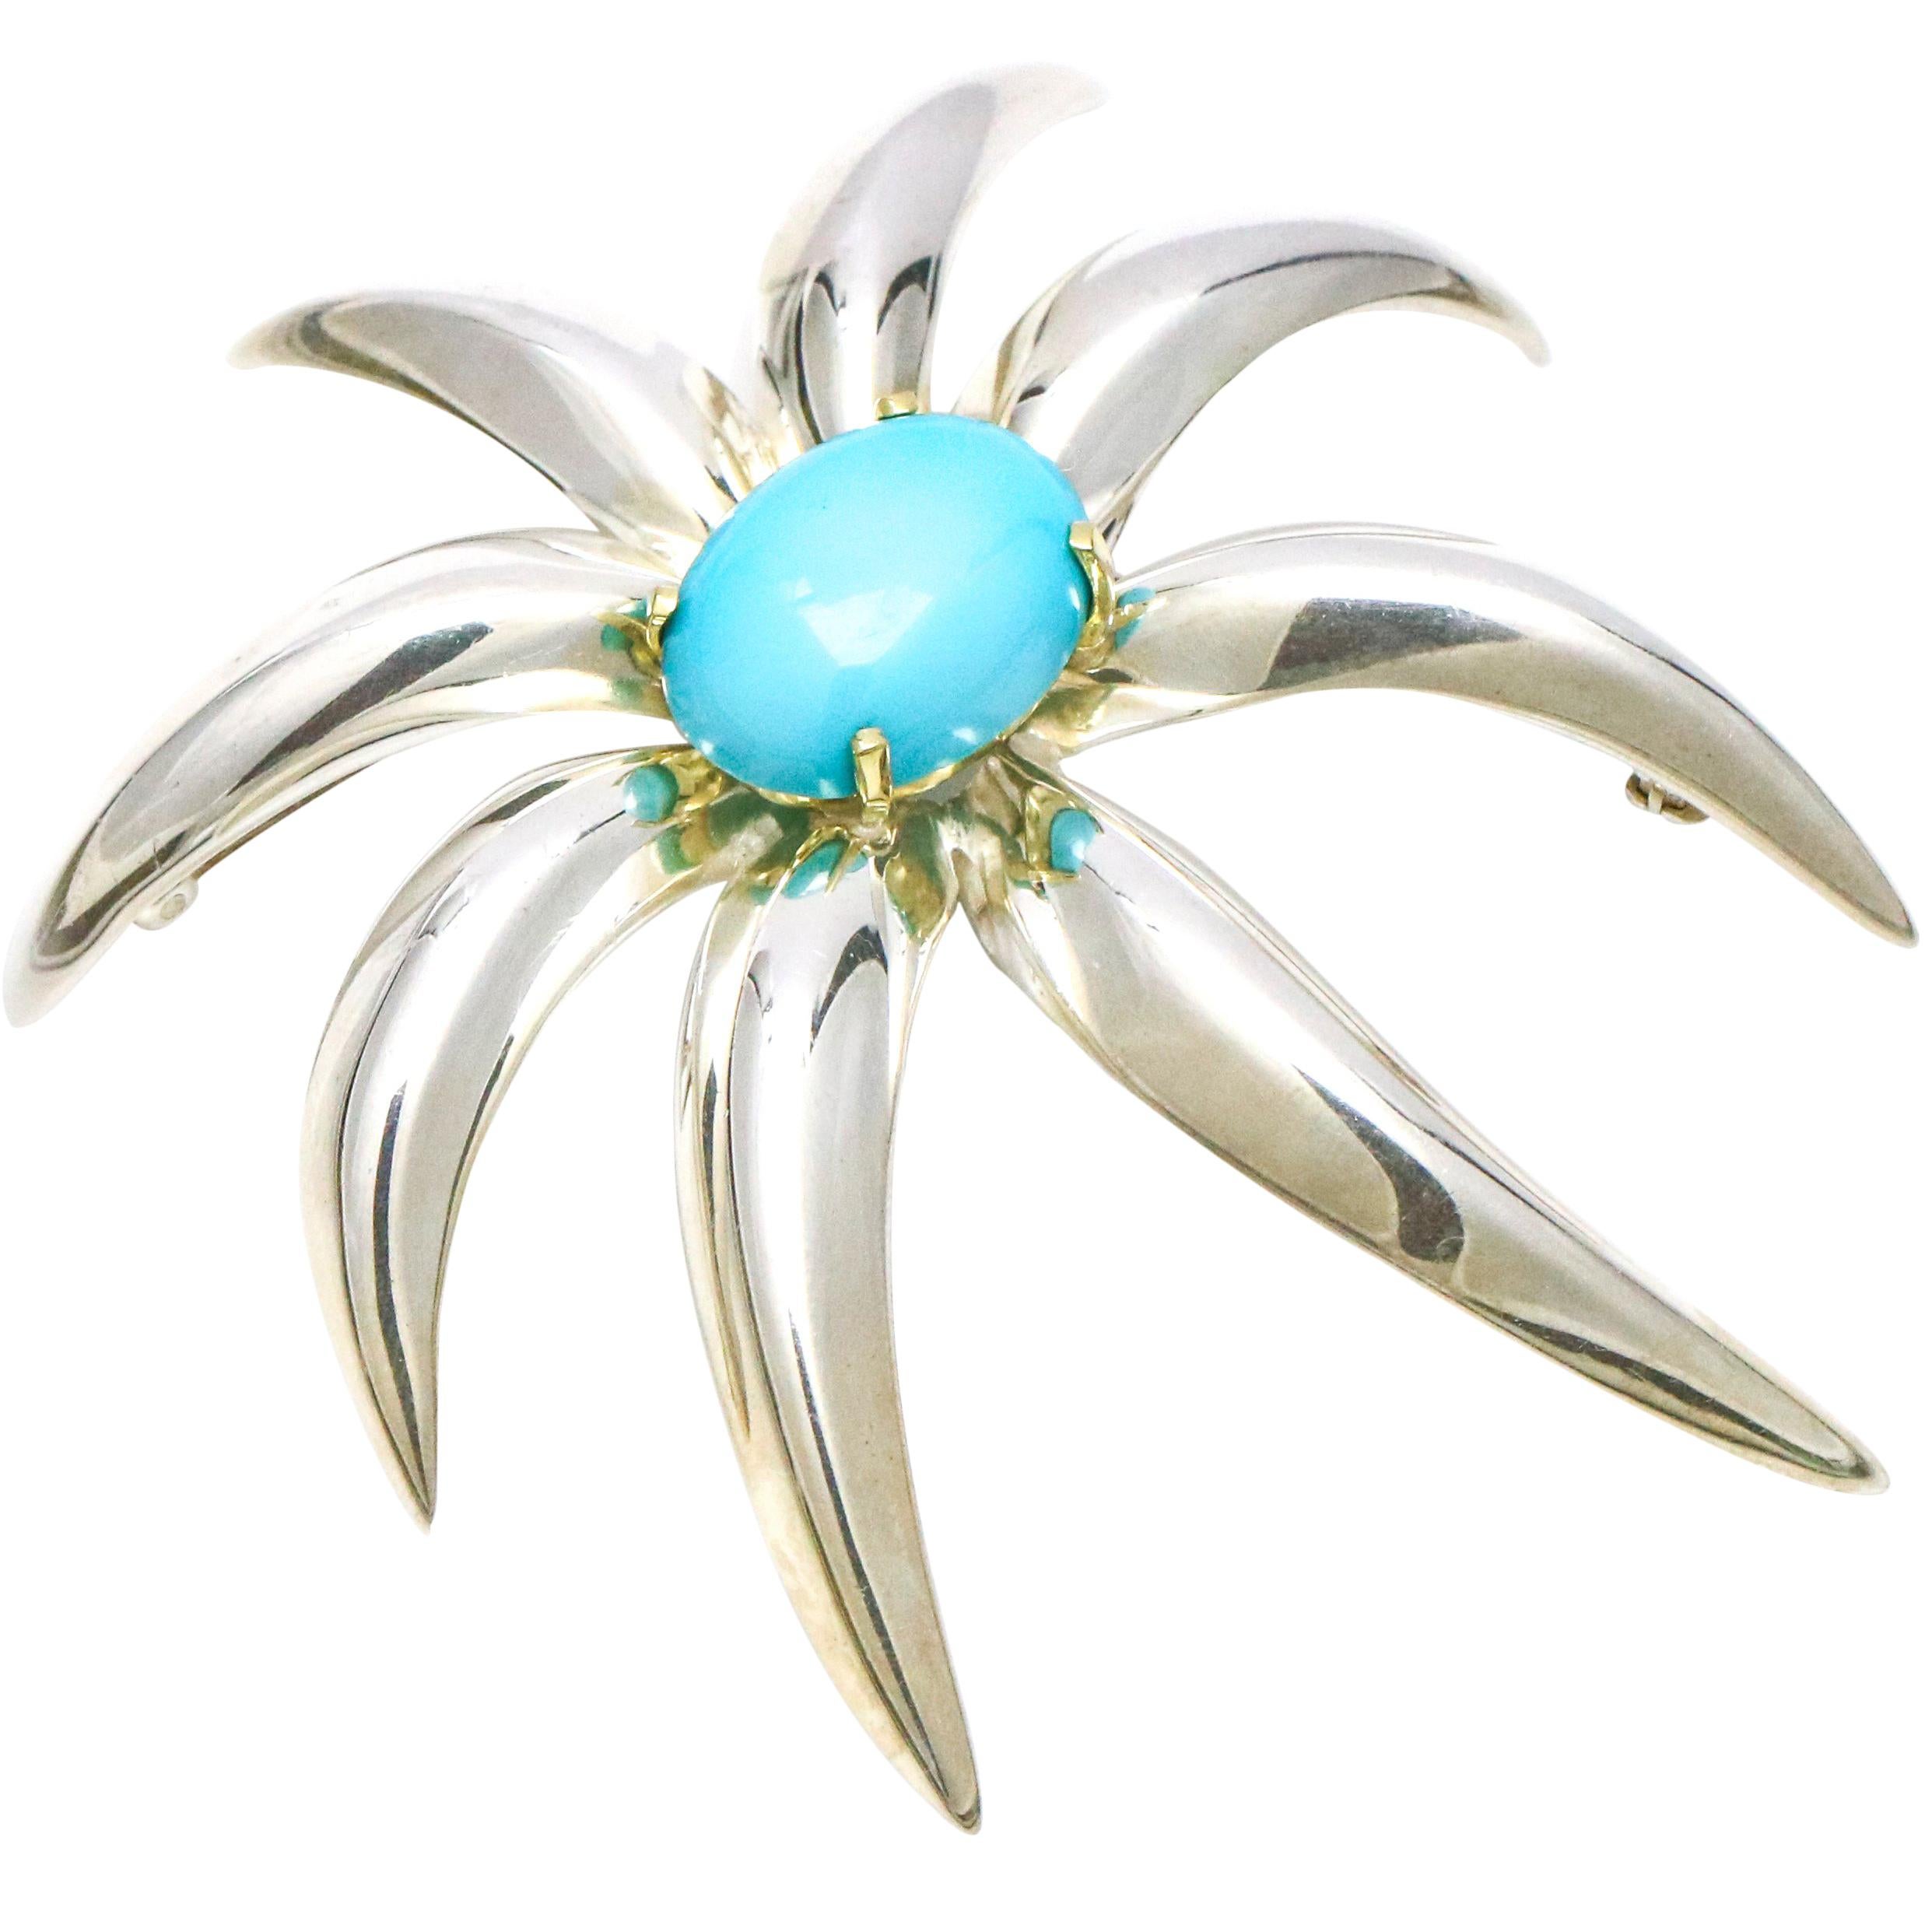 Tiffany & Co. 18 Karat Gold Sterling Silver Fireworks Persian Turquoise Brooch For Sale